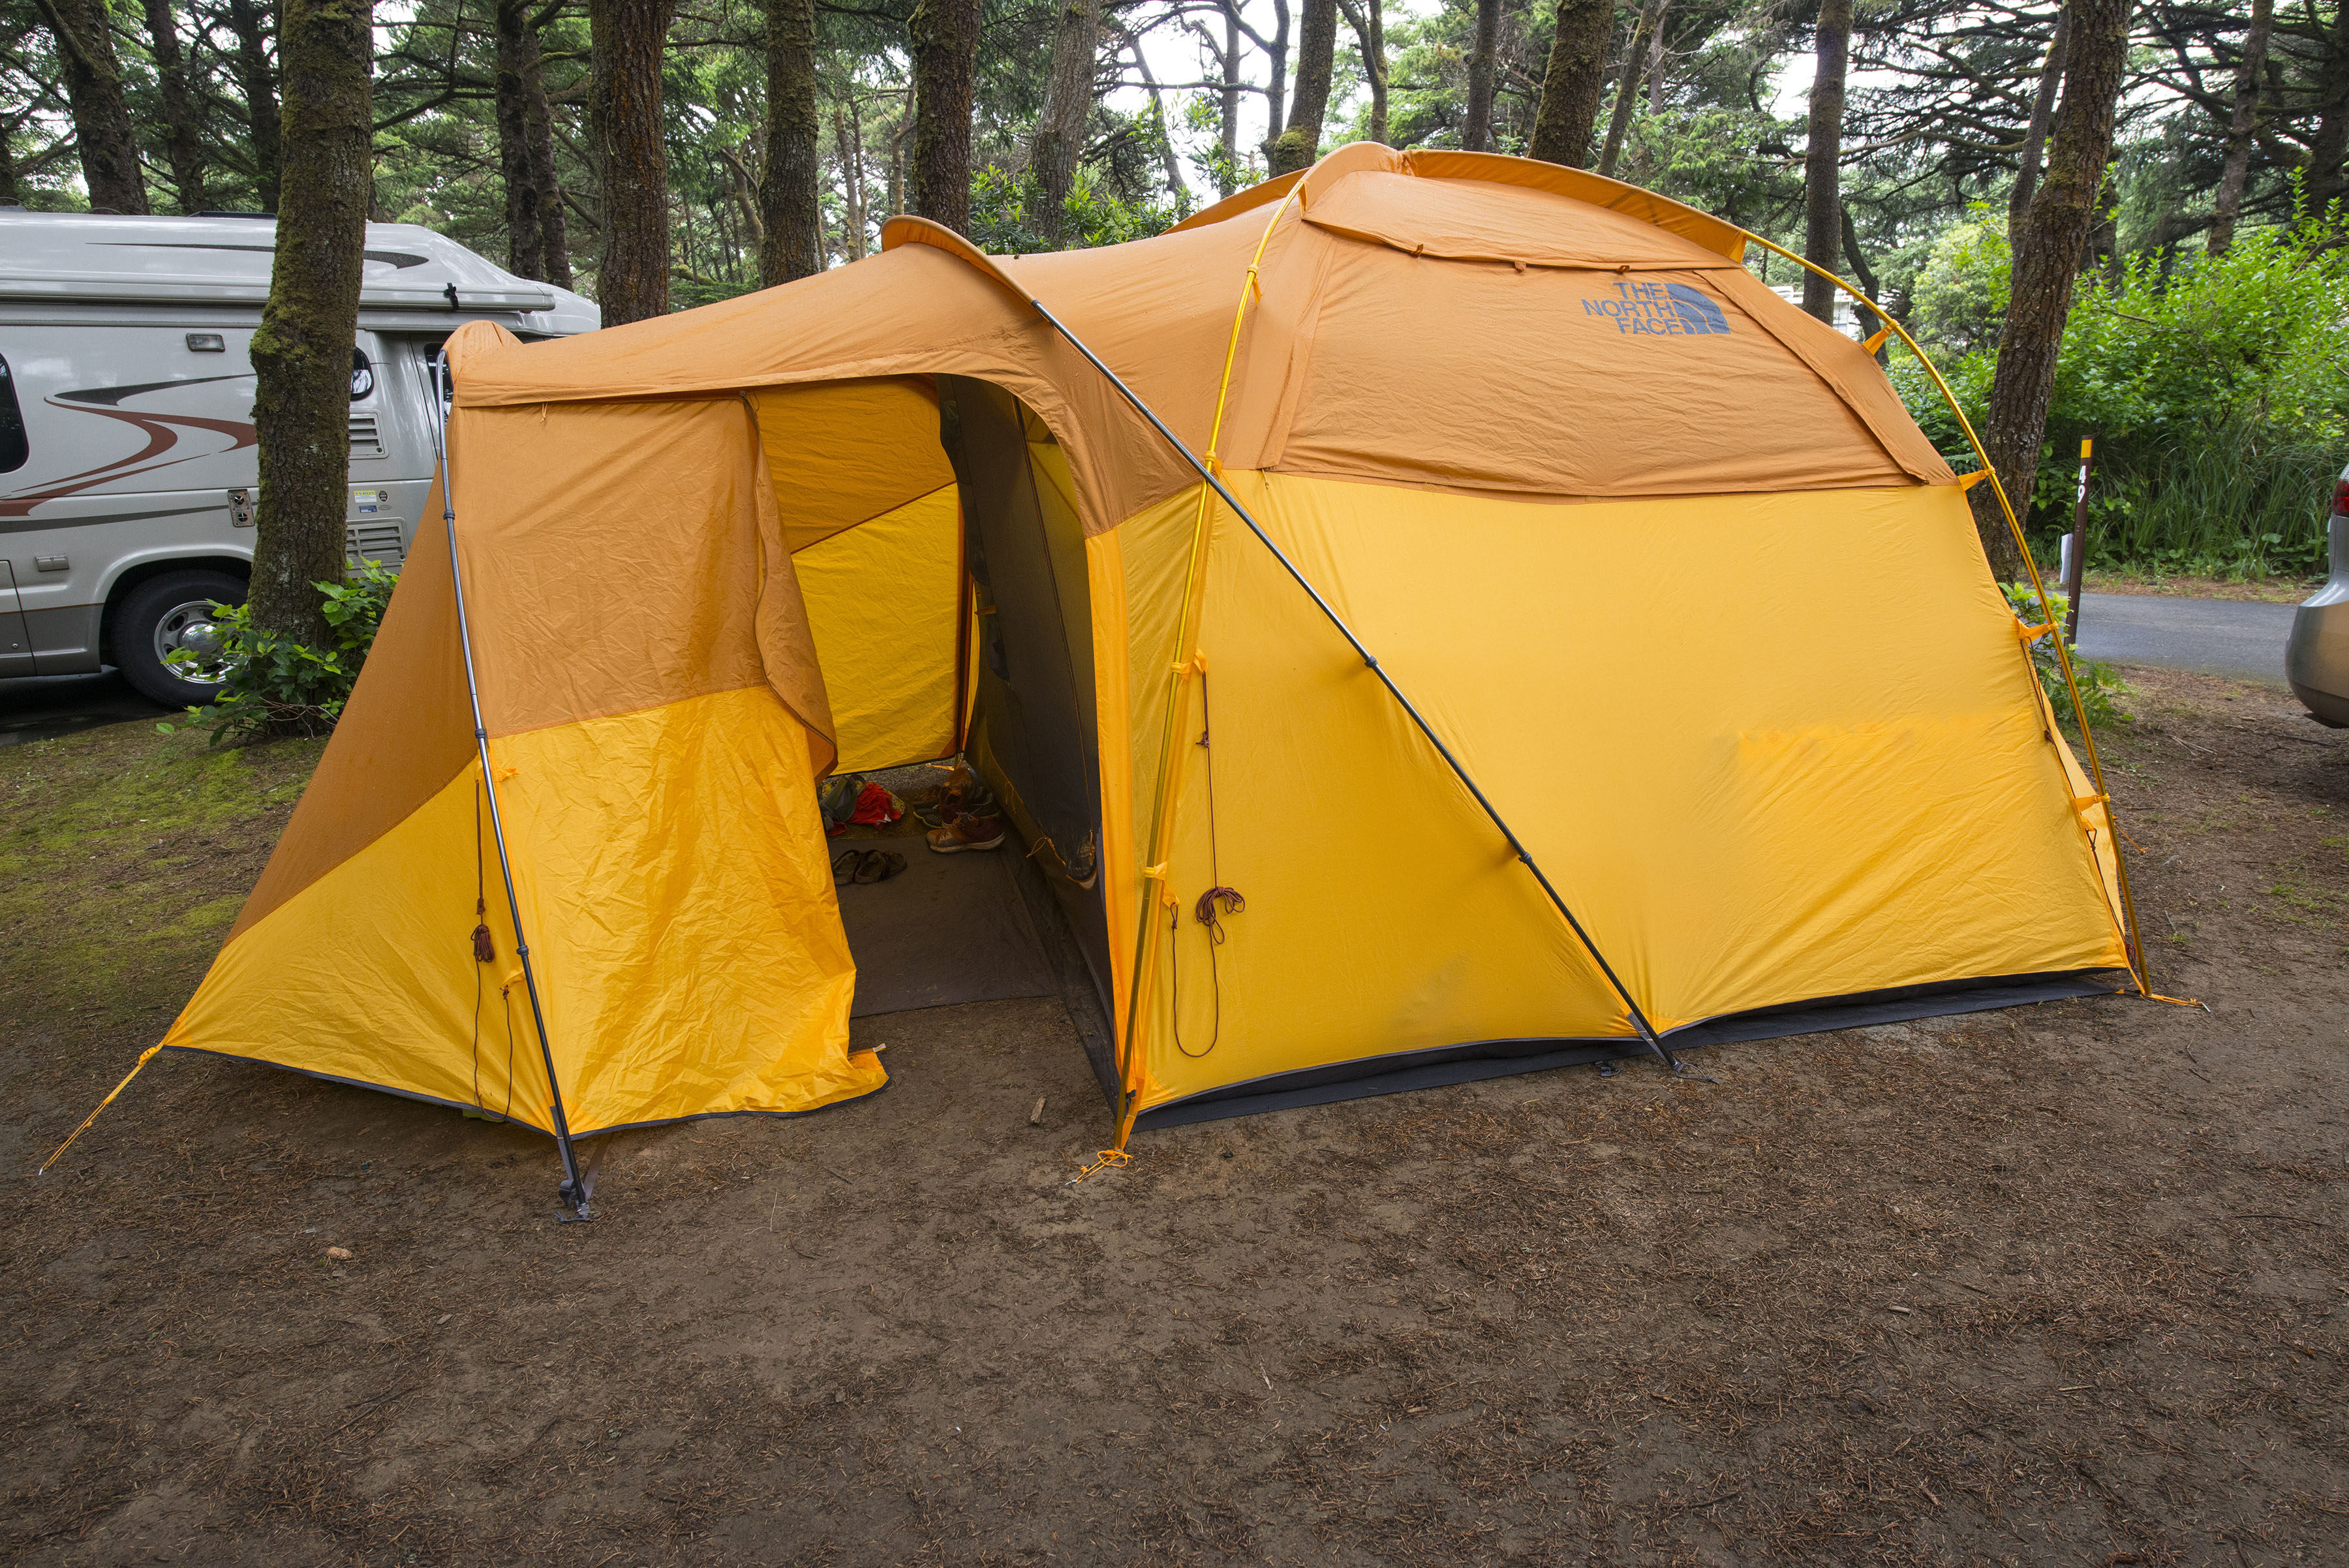 Gear Review: The North Face Wawona 6 Tent | Outdoor Project